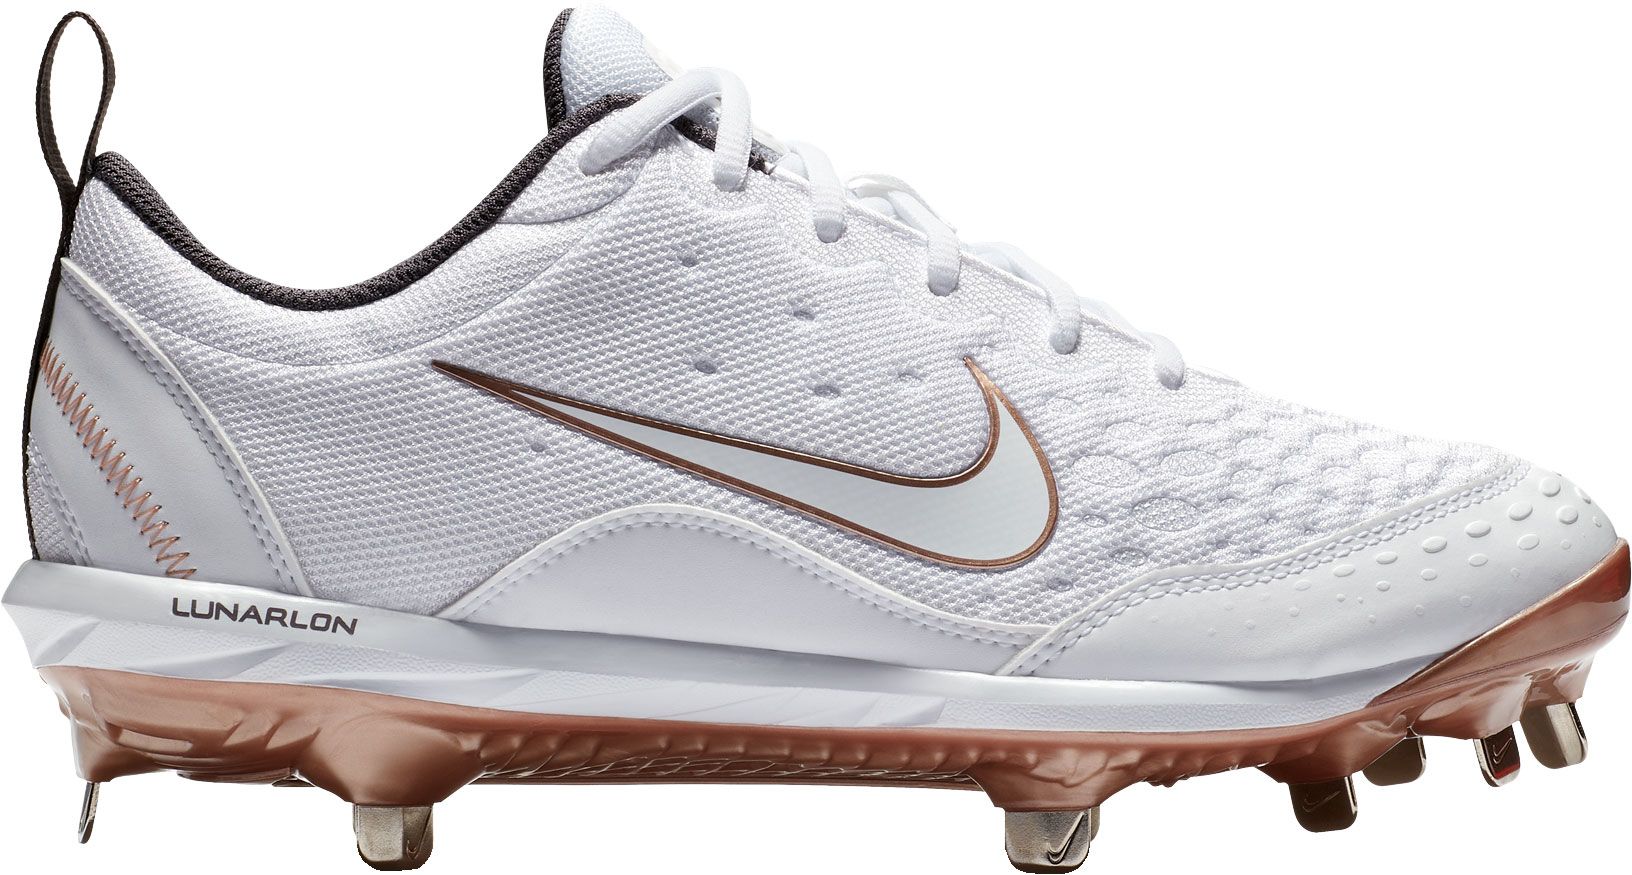 rose gold nike cleats